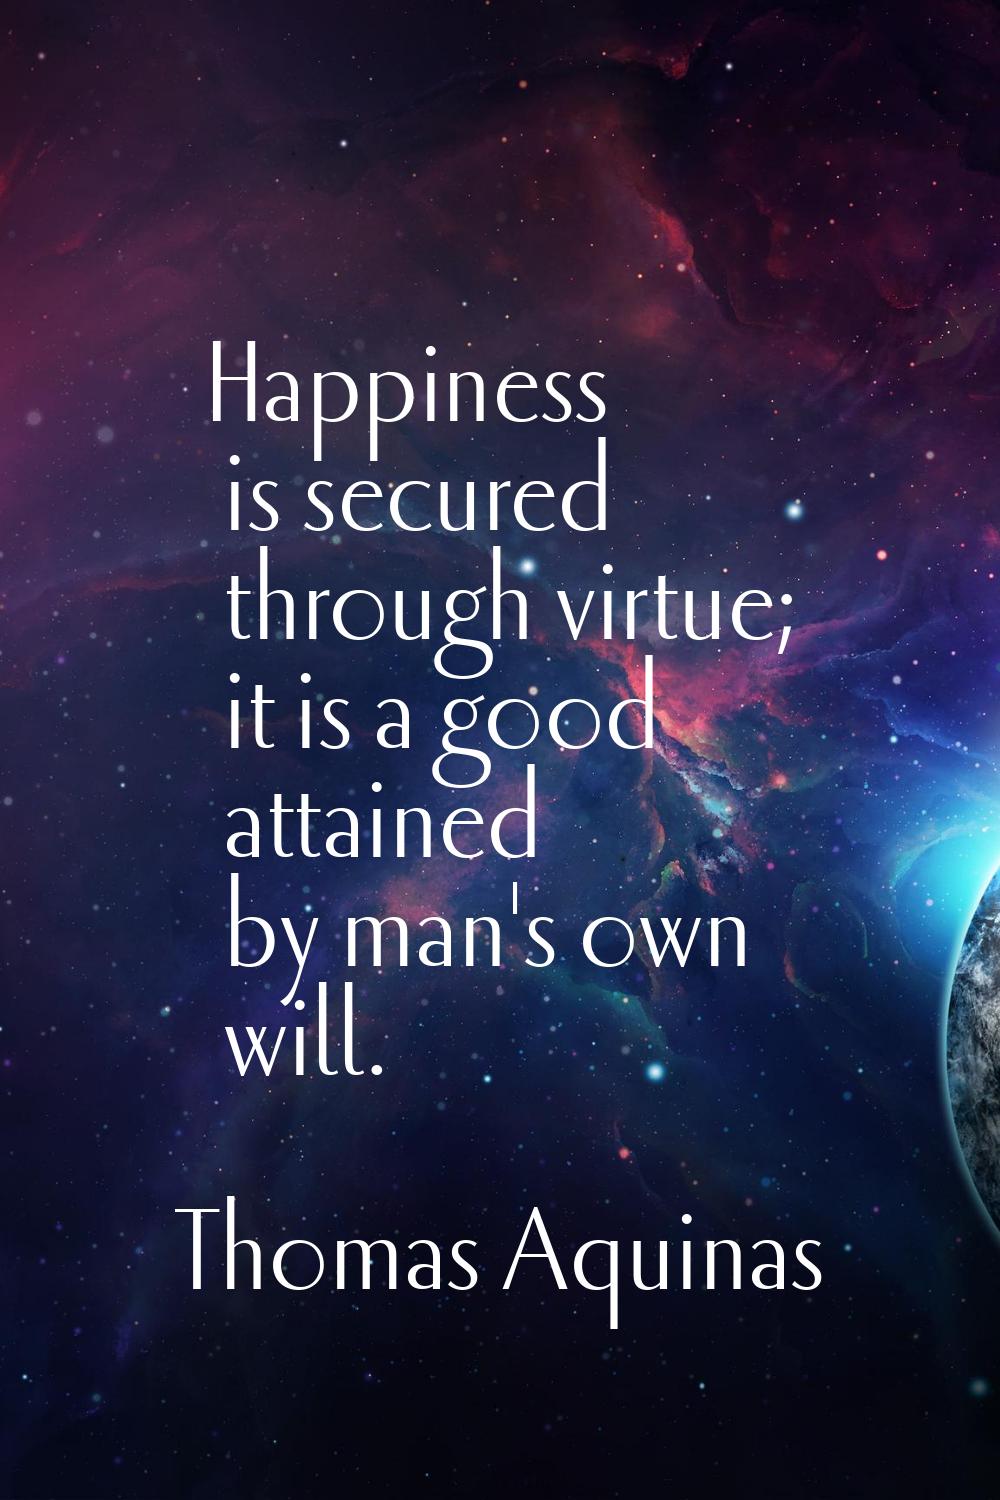 Happiness is secured through virtue; it is a good attained by man's own will.